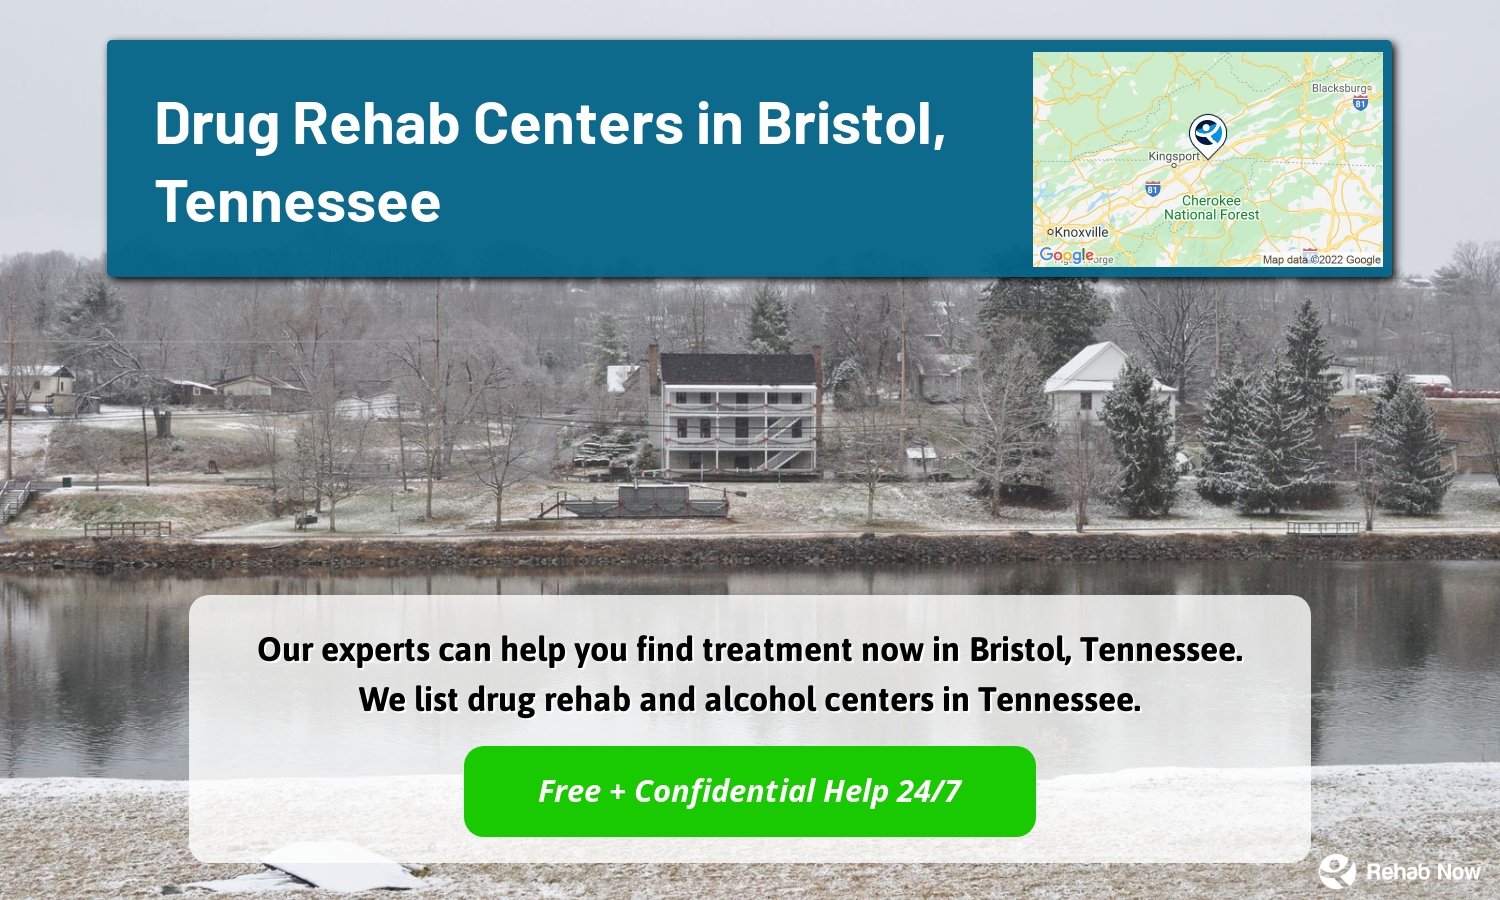 Our experts can help you find treatment now in Bristol, Tennessee. We list drug rehab and alcohol centers in Tennessee.